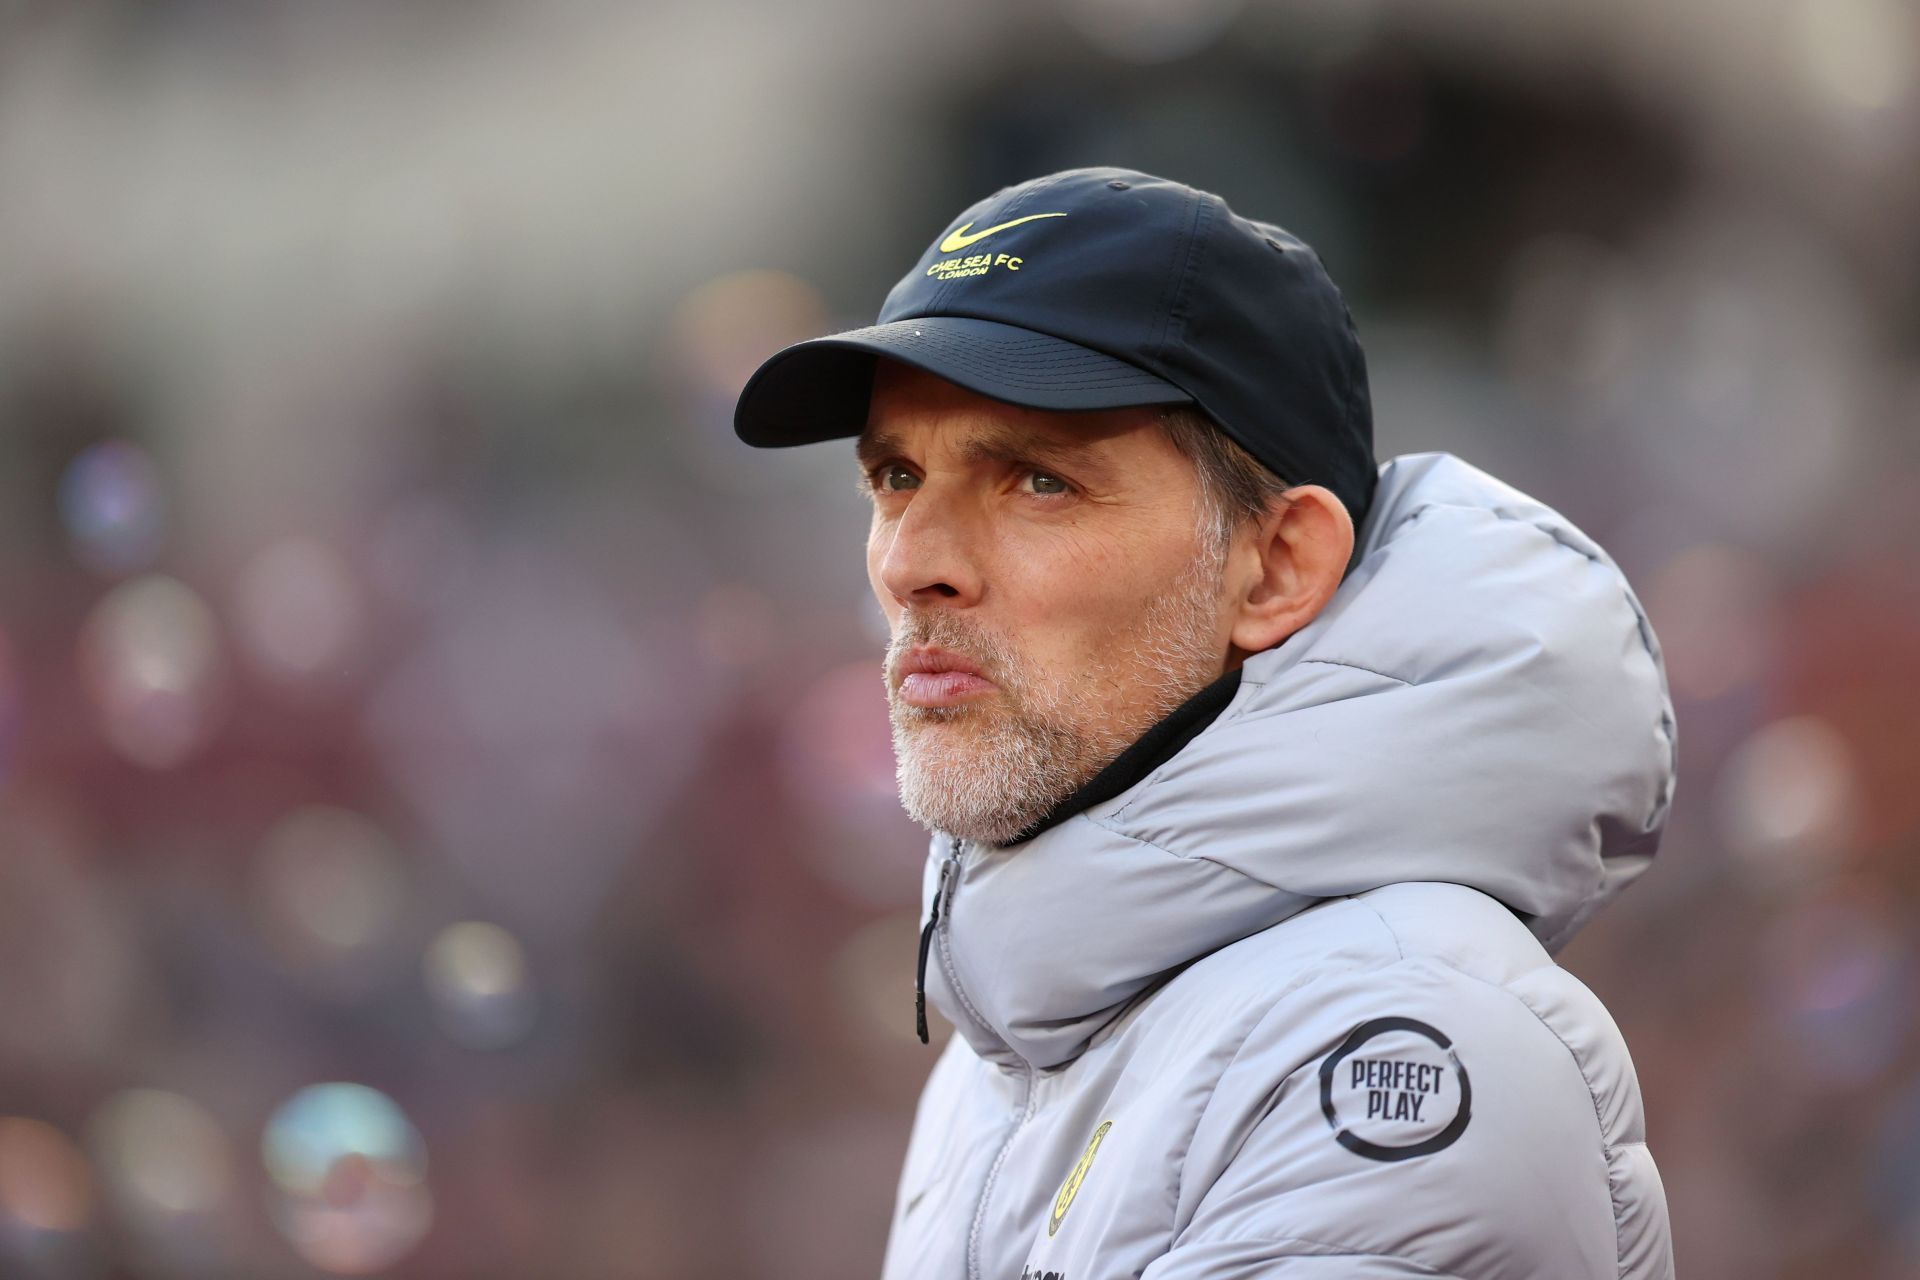 Chelsea manager Thomas Tuchel is preparing to face Wolverhampton Wanderers.